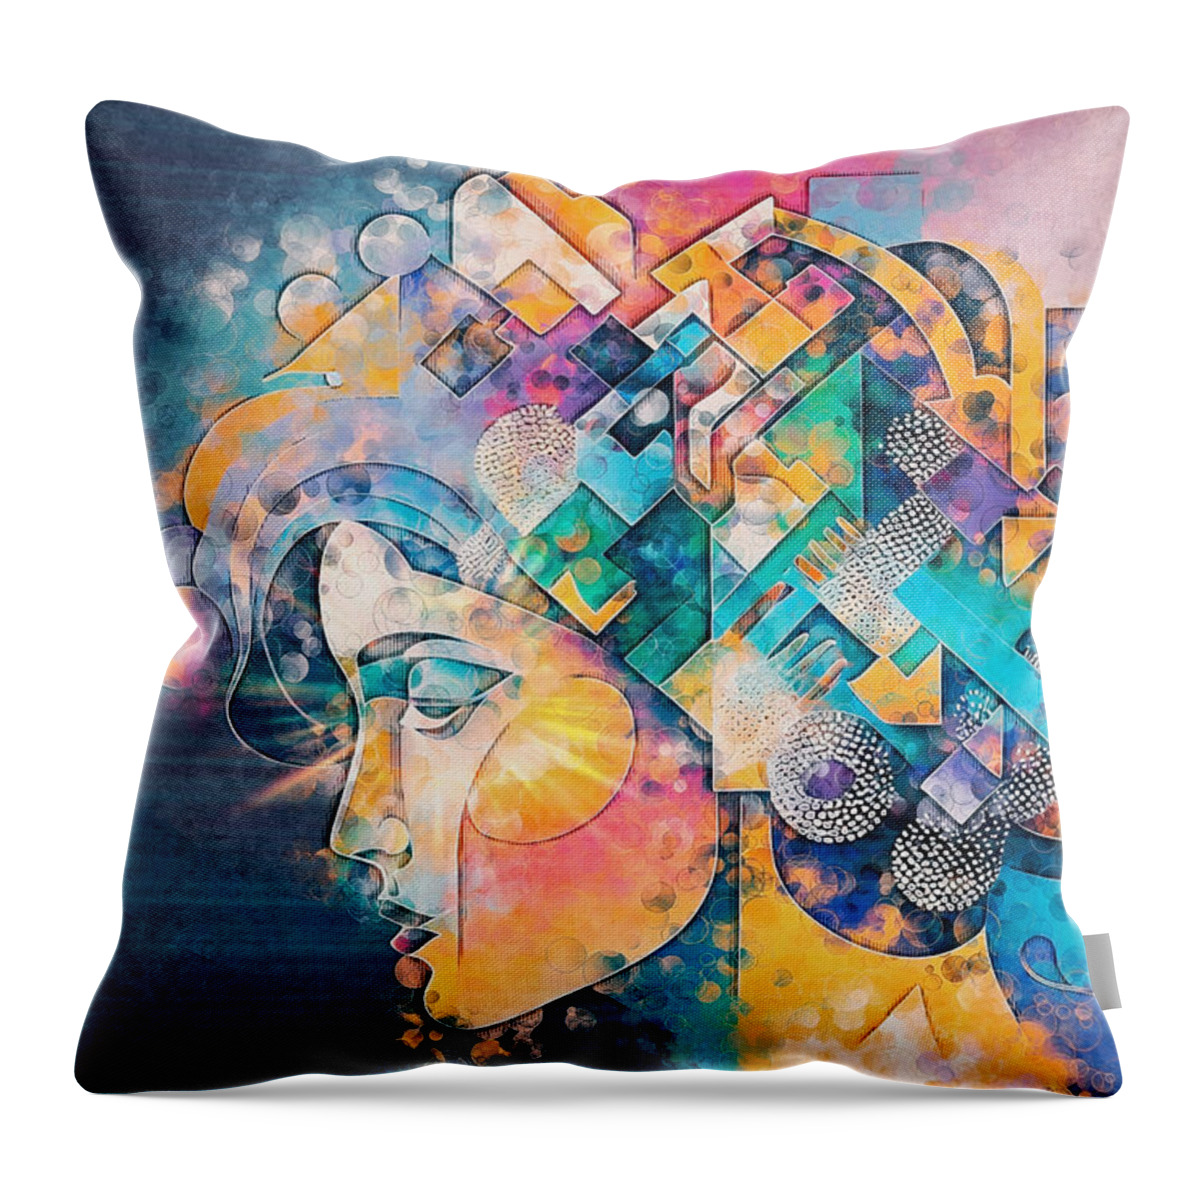 Portrait Throw Pillow featuring the digital art Colourful Abstract Portrait - 01632-SA1A by Philip Preston